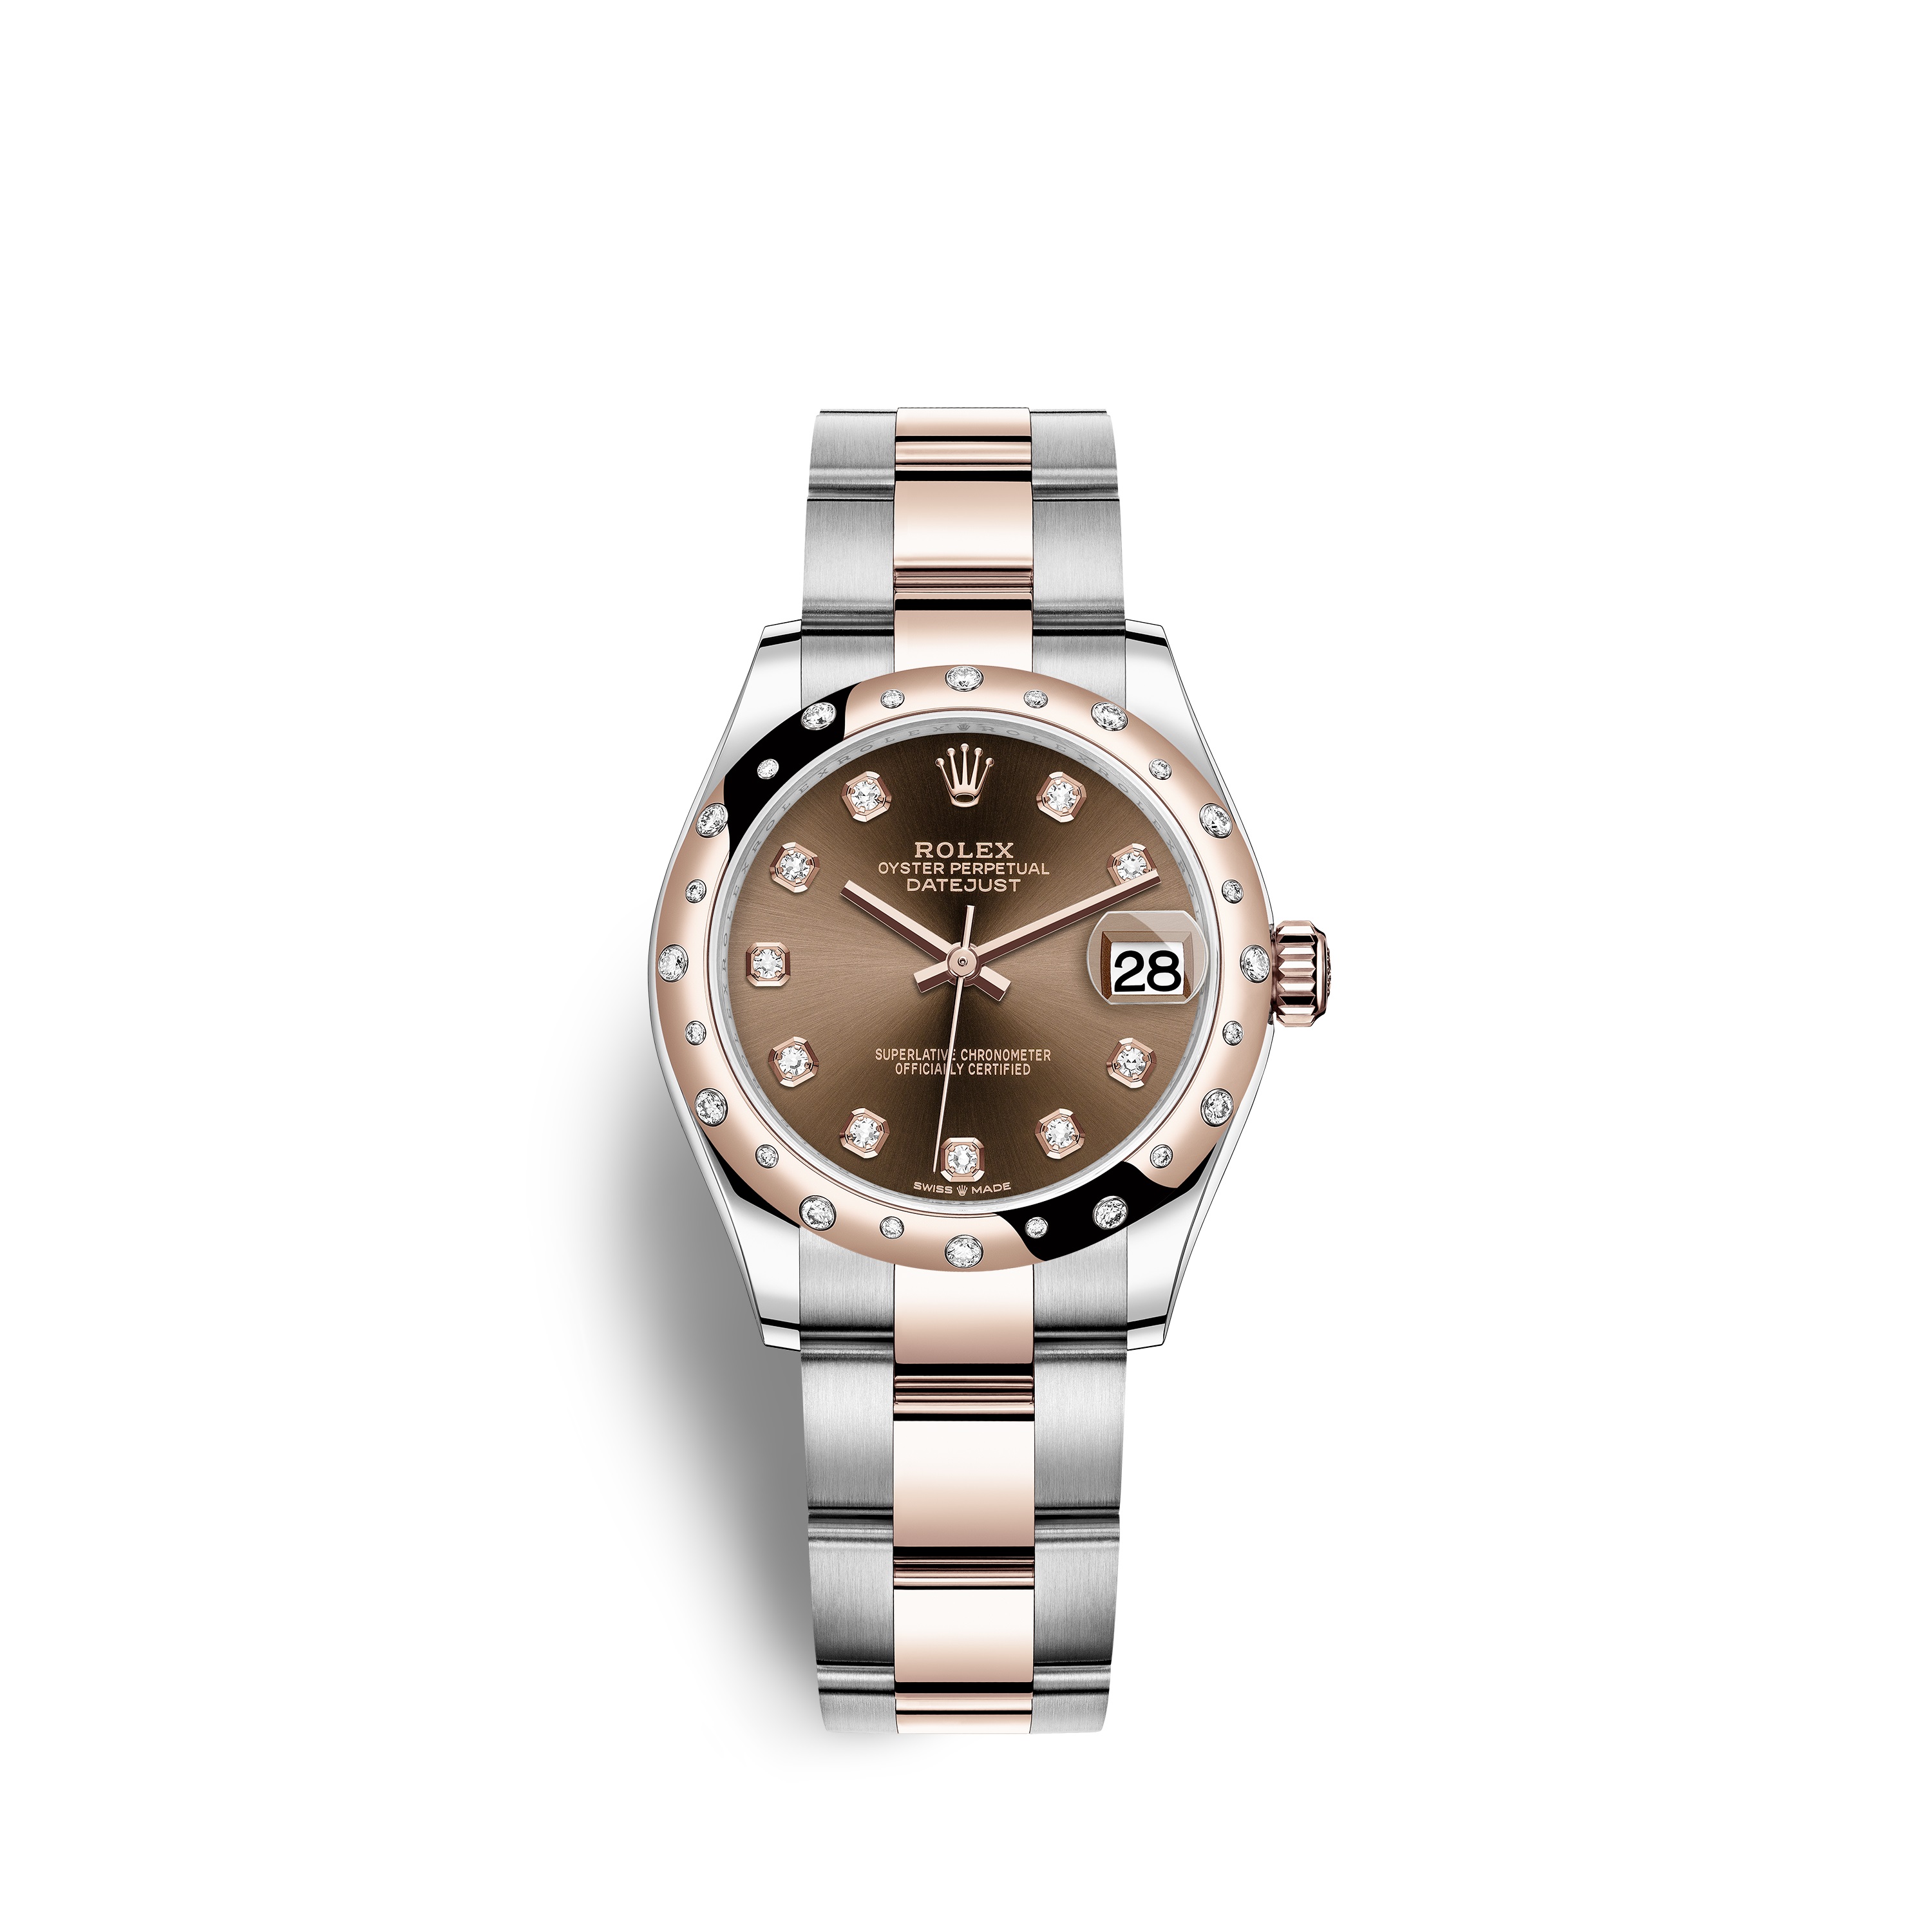 Datejust 31 278341RBR Rose Gold, Stainless Steel & Diamonds Watch (Chocolate Set with Diamonds)